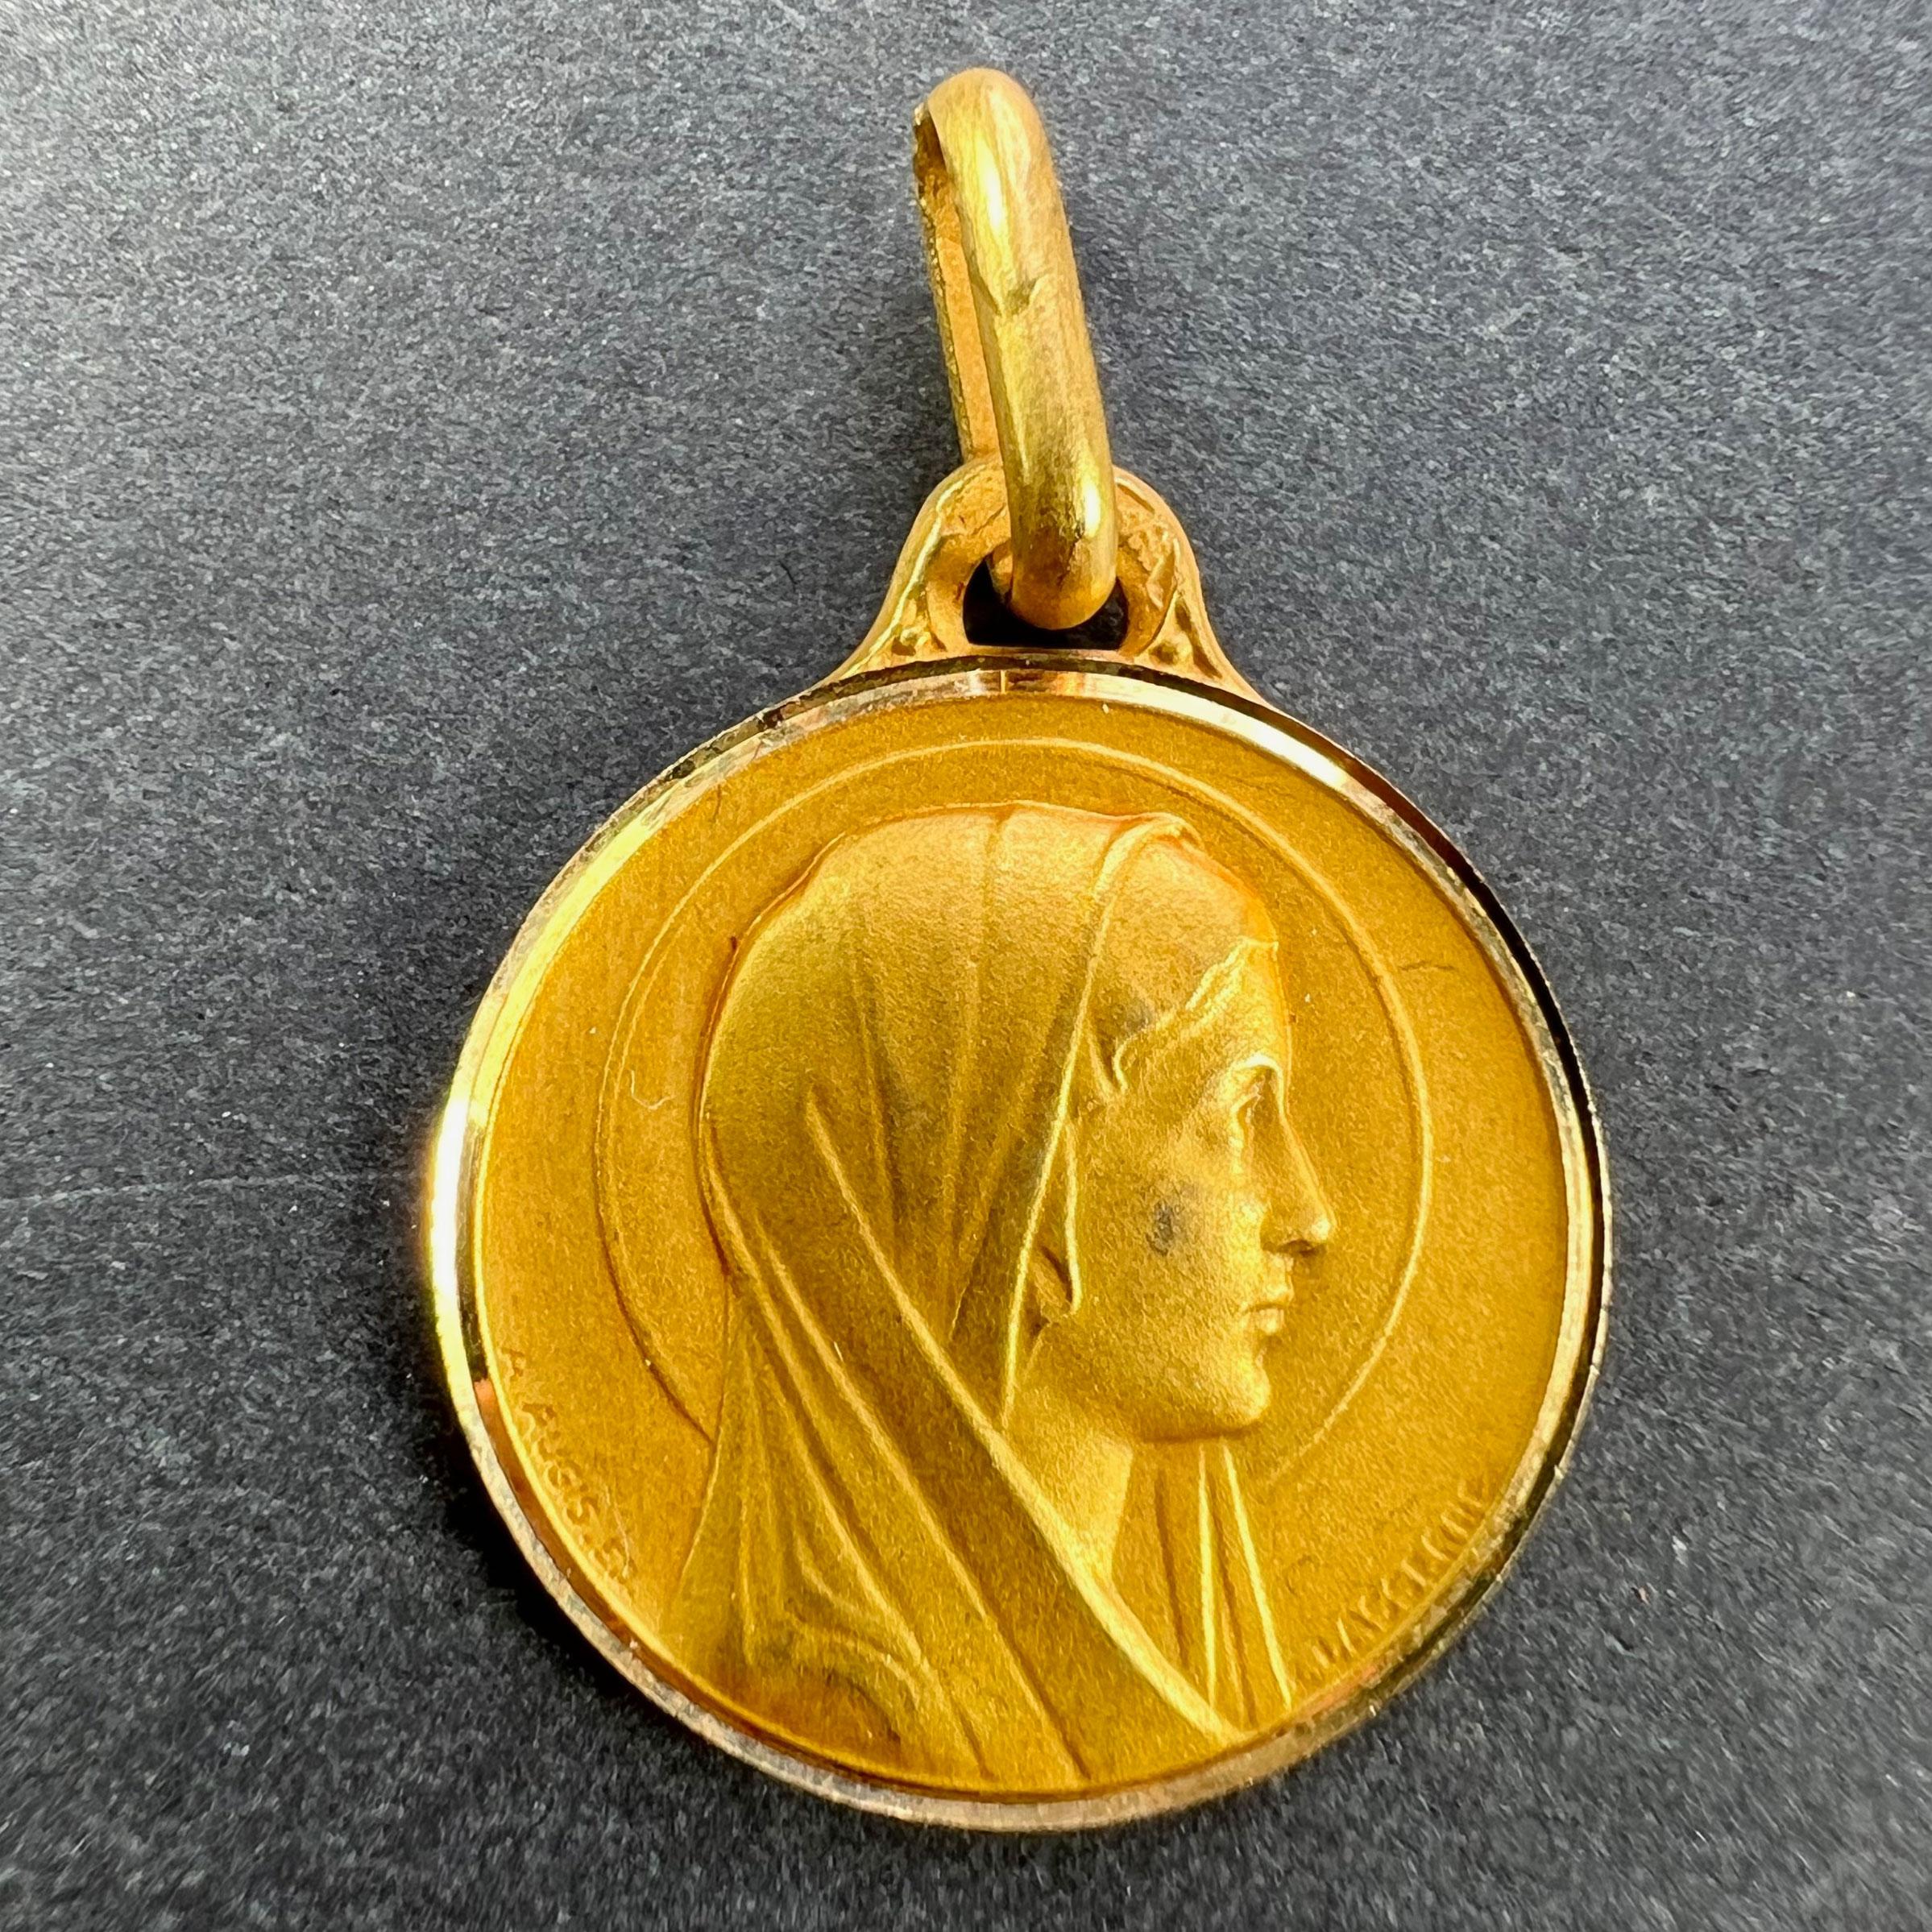 A French 18 karat (18K) yellow gold pendant designed as a round medal depicting the Virgin Mary in profile with a halo. Signed Lasserre and A.Augis. Stamped with the eagle’s head for French manufacture and 18 karat gold, with maker’s mark for